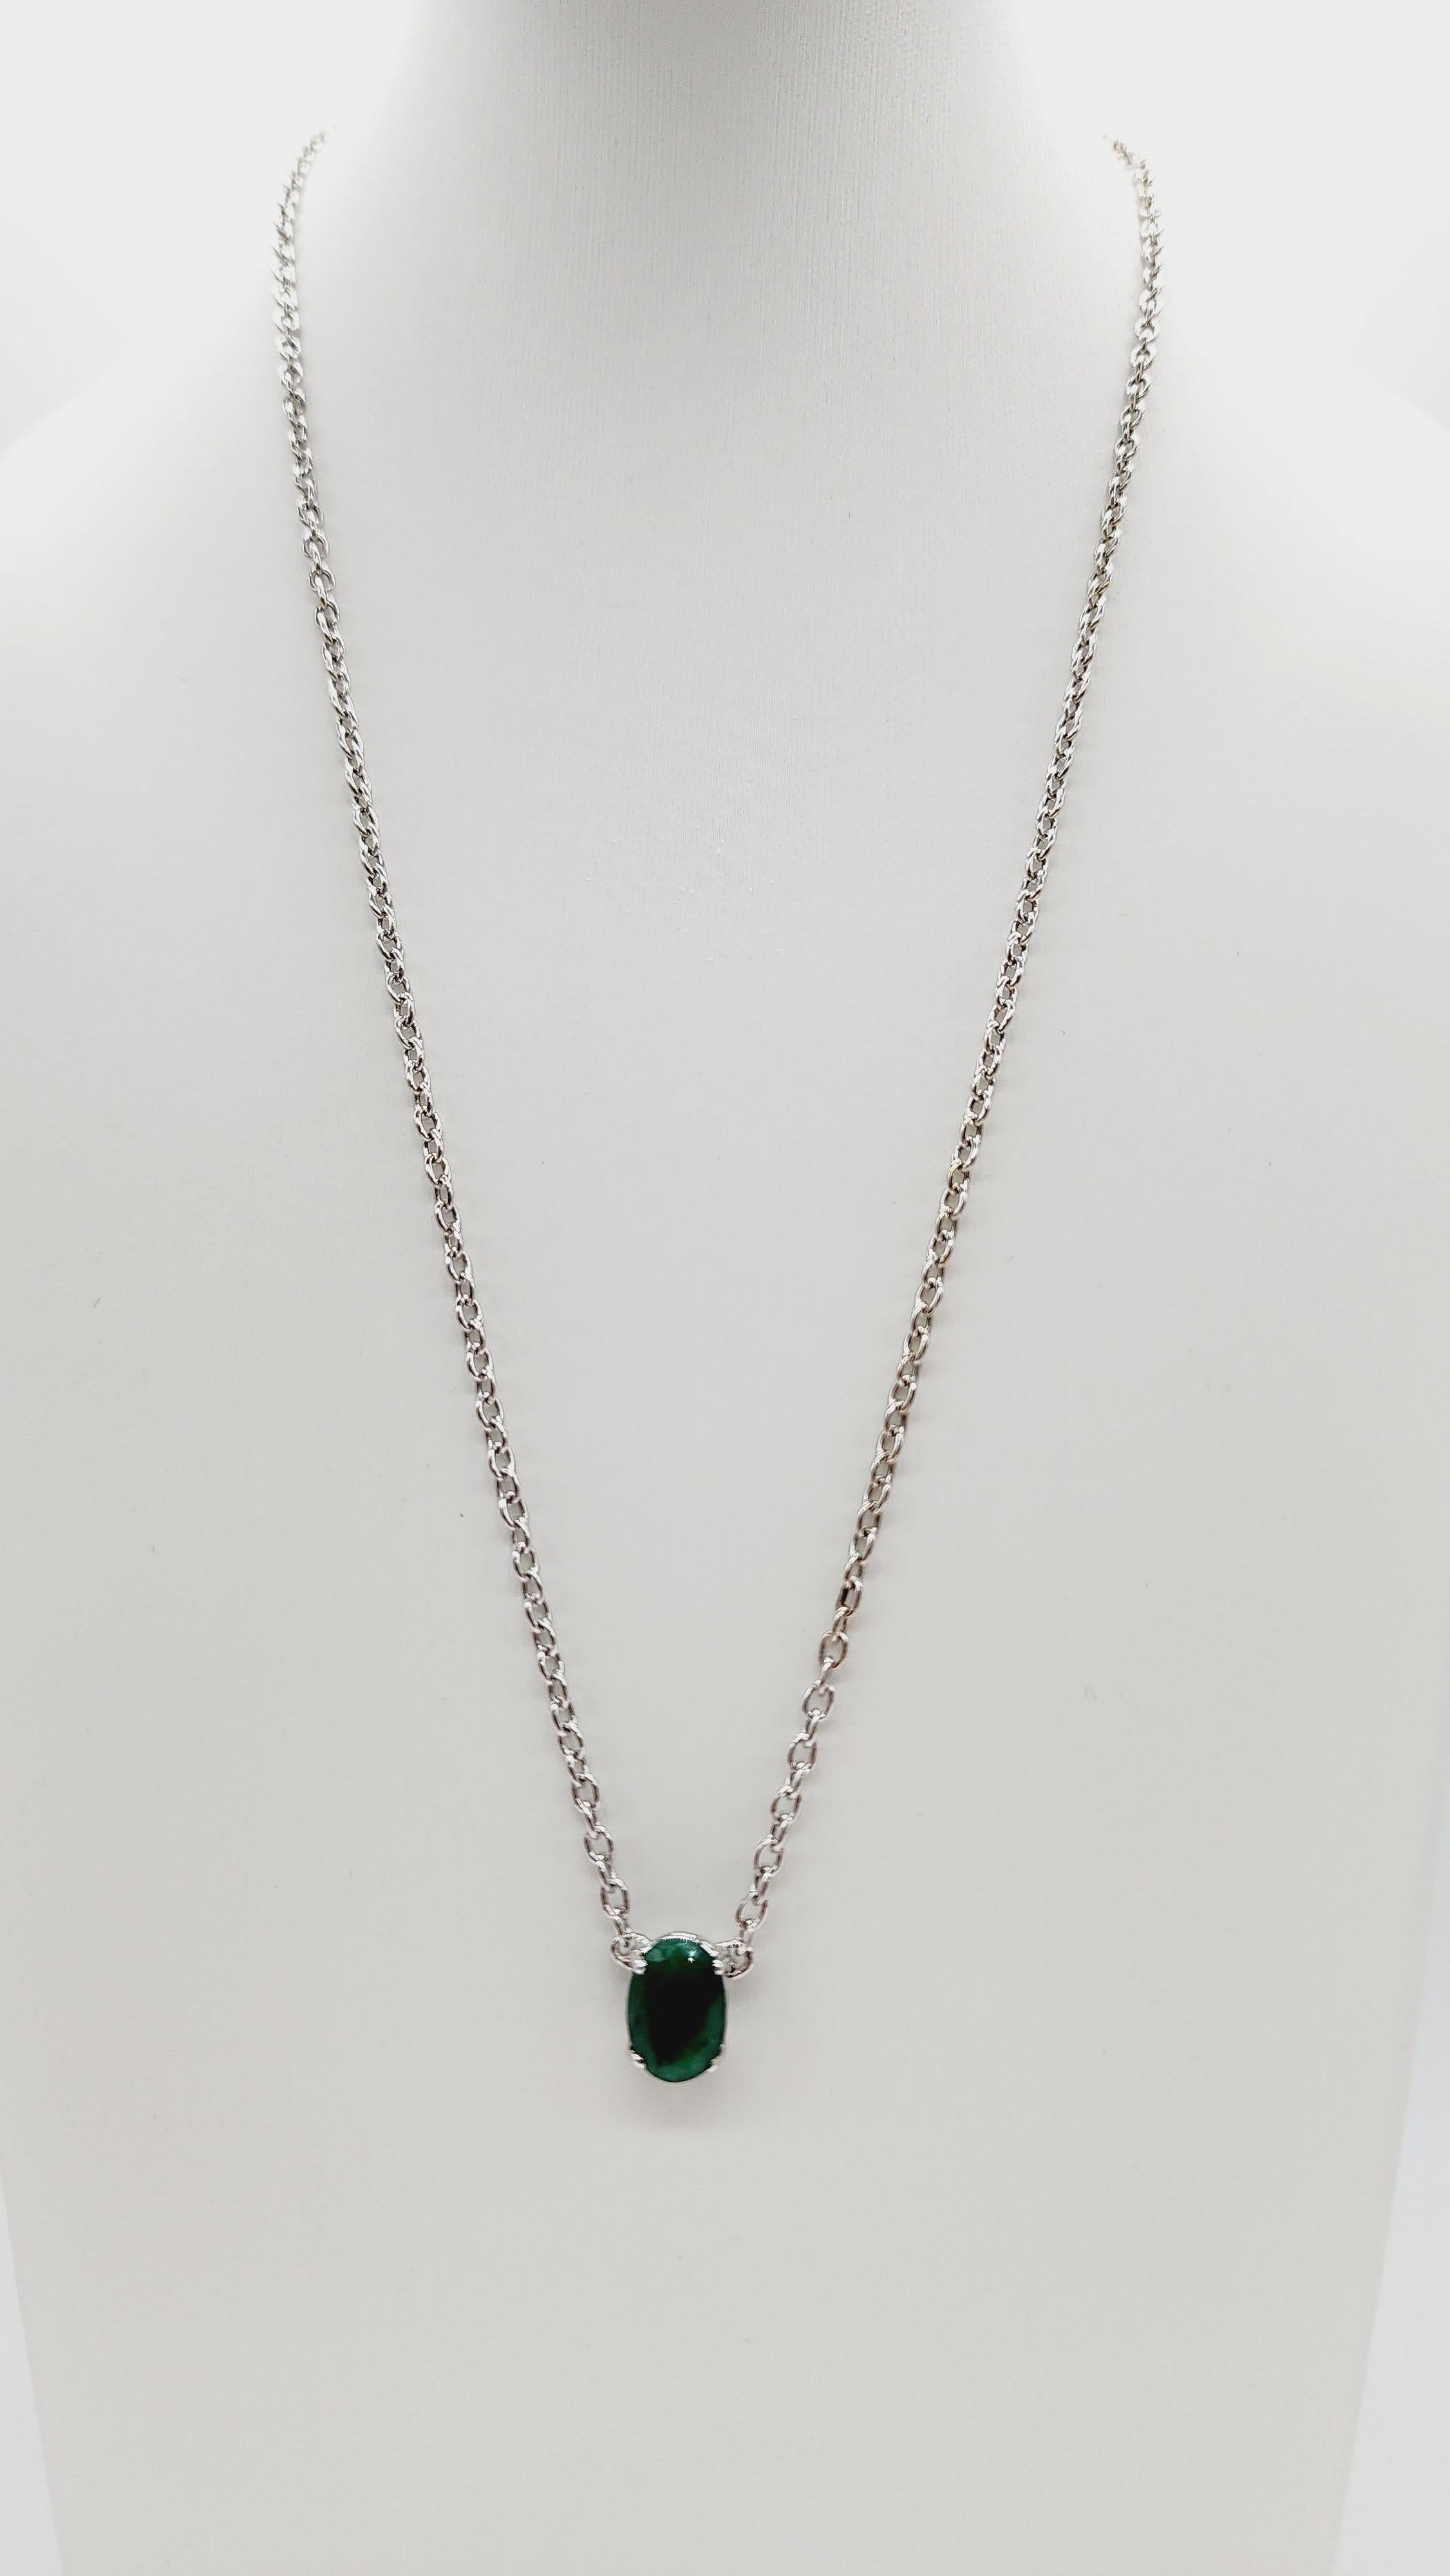 Brilliant and beautiful. 14 Karat White Gold Necklace. Oval Shape Emerald Center. Insert clasp closure with safety secure latch. Elegance you can wear everyday.

Center emerald weight: 2.18 carats 
Setting type: 14k White gold
Length: 20